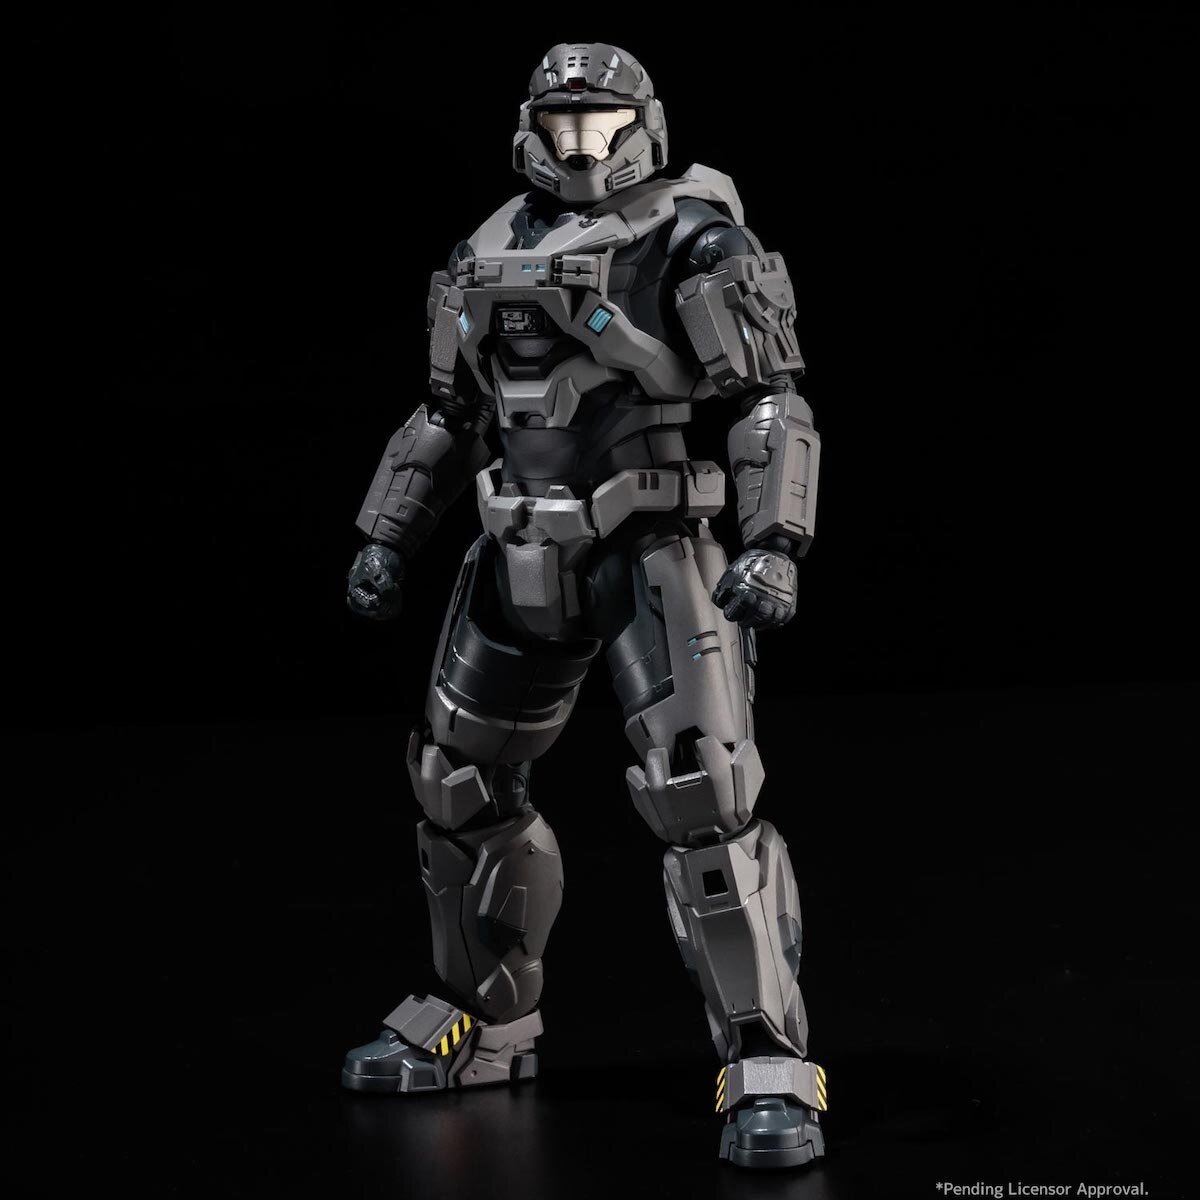 Halo Reach at the best price